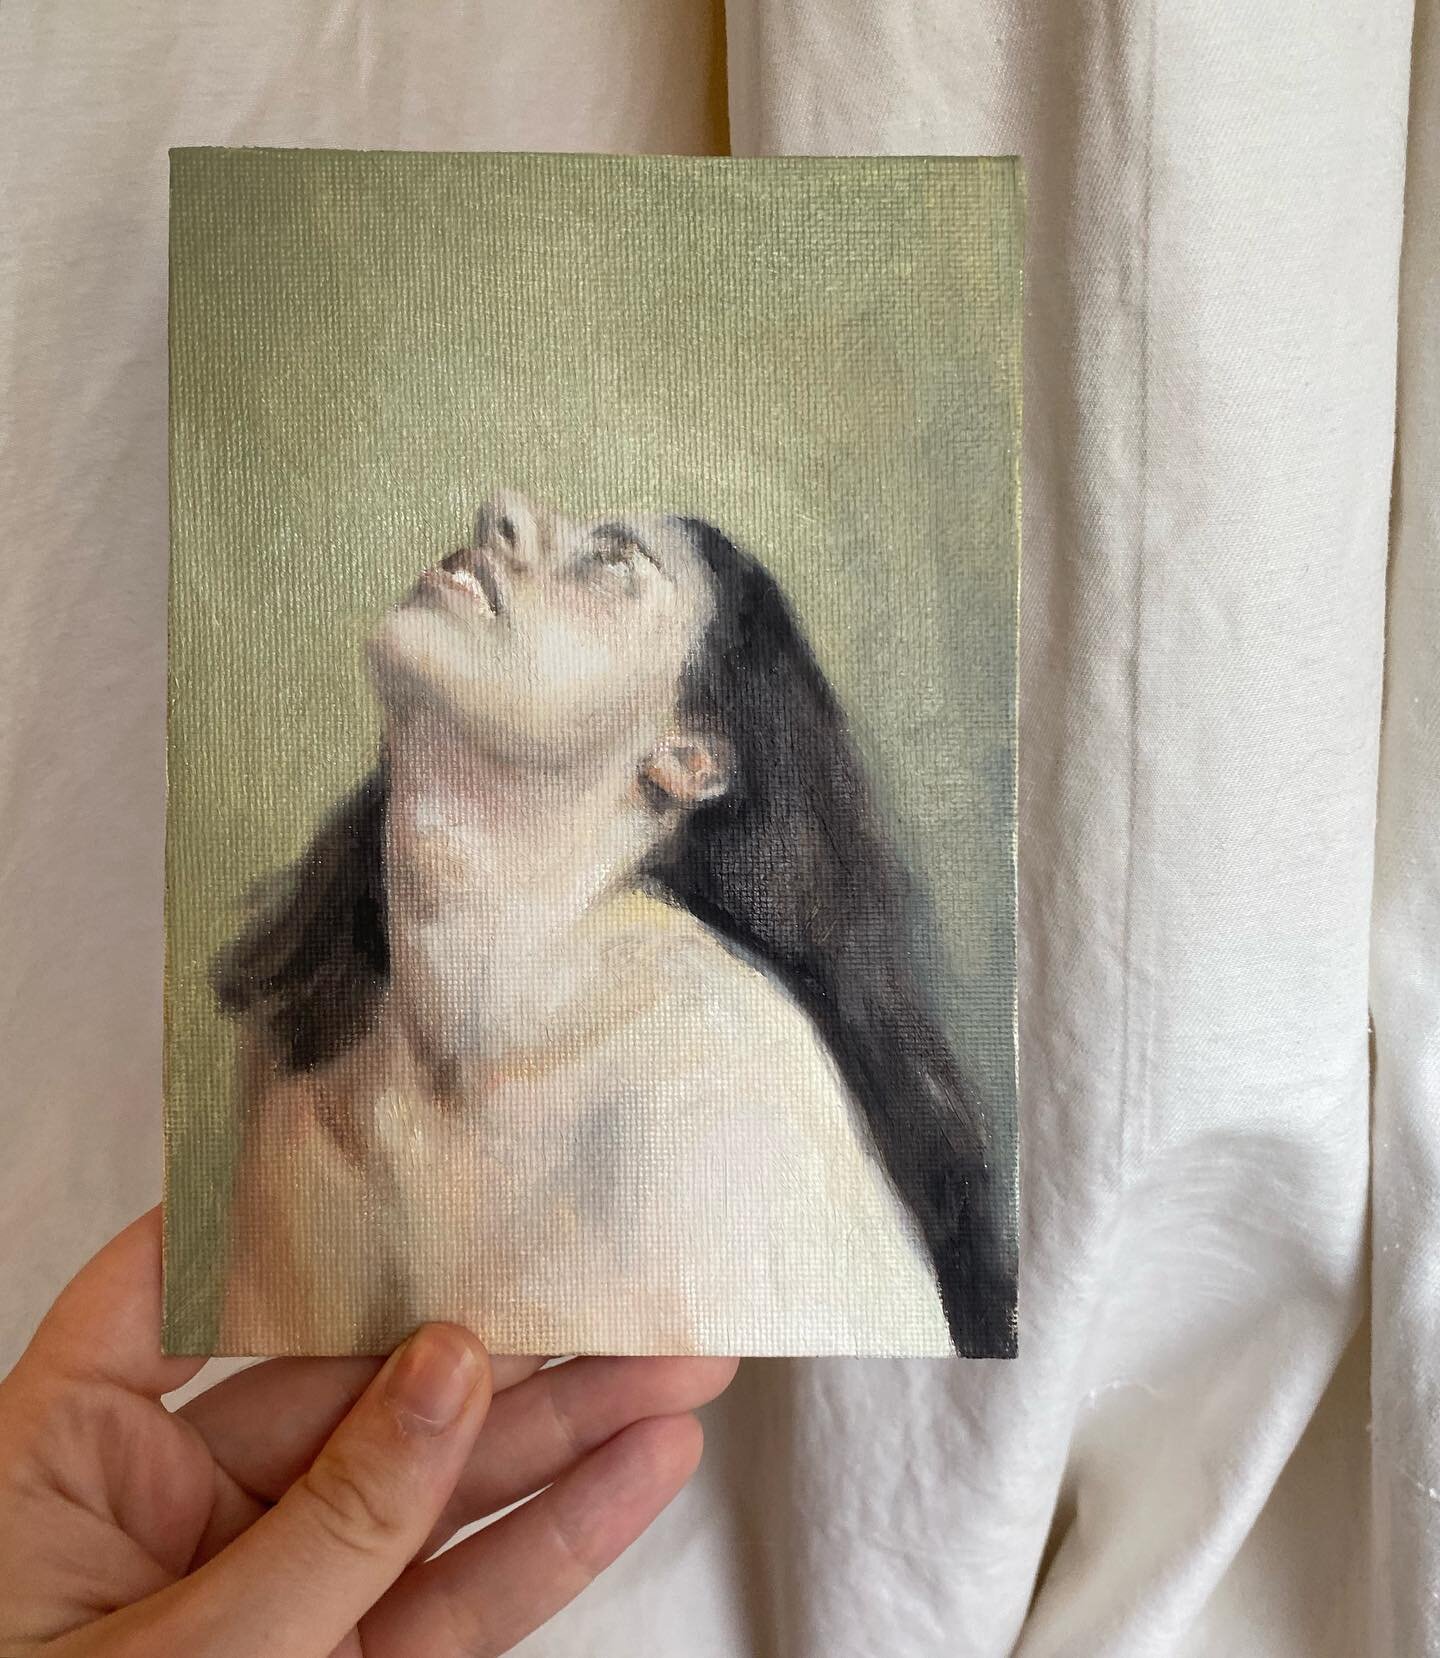 Oil sketch on canvas board.  I unexpectedly feel in love with the background colour. 

Image Description:
Image 1:
A hand is holding a small canvas board with an oil painting sketch of a white woman with brown hair. The painting shows the woman from 